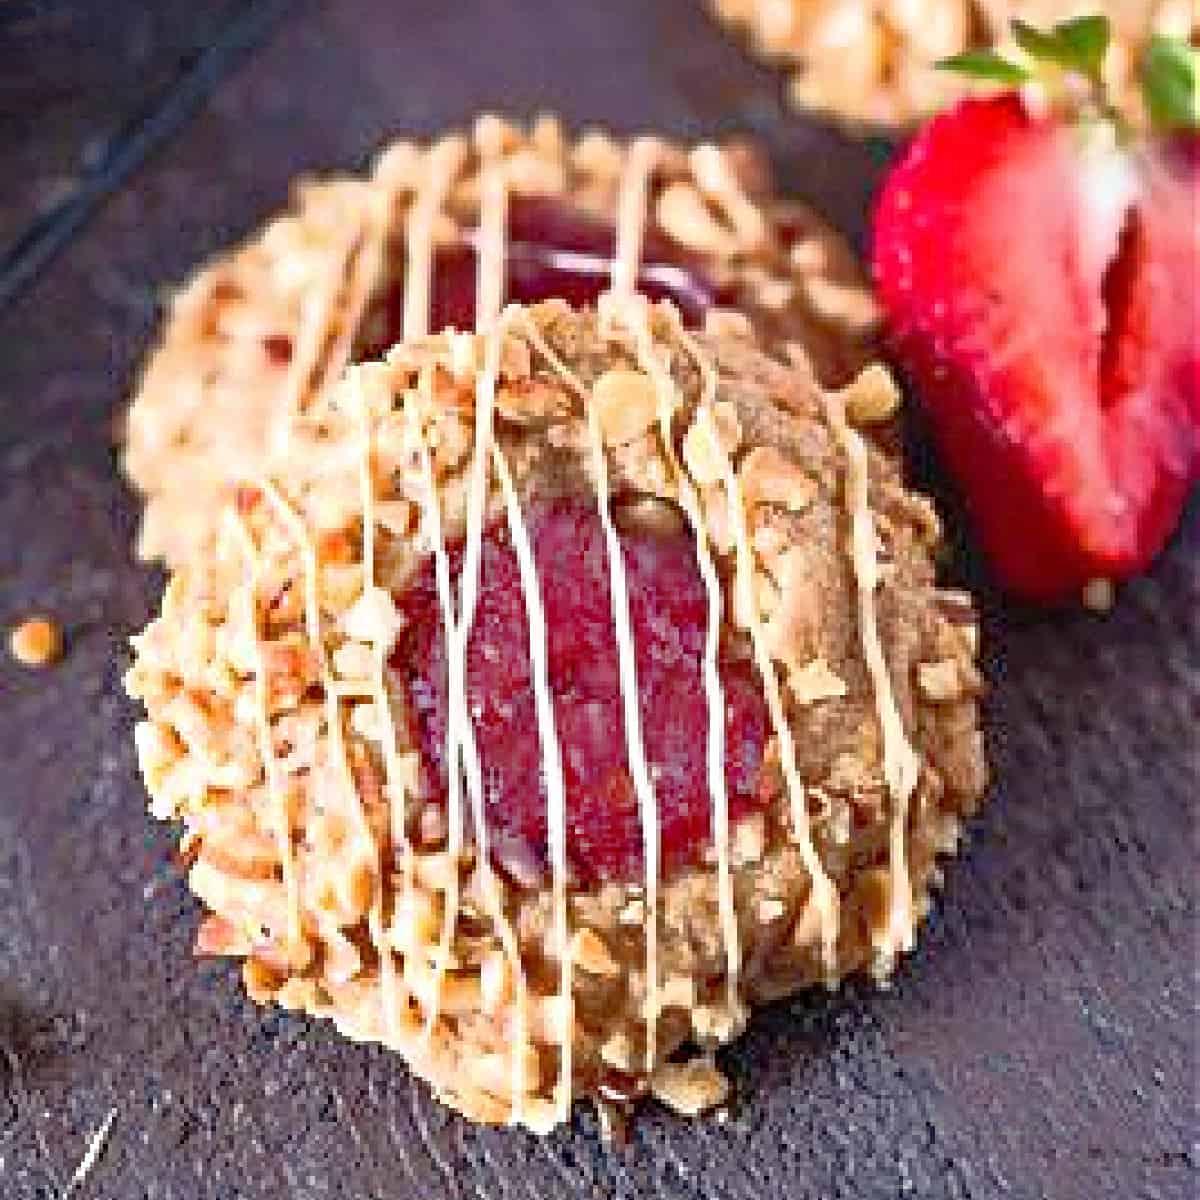 Keto Peanut Butter & Jelly Cookies